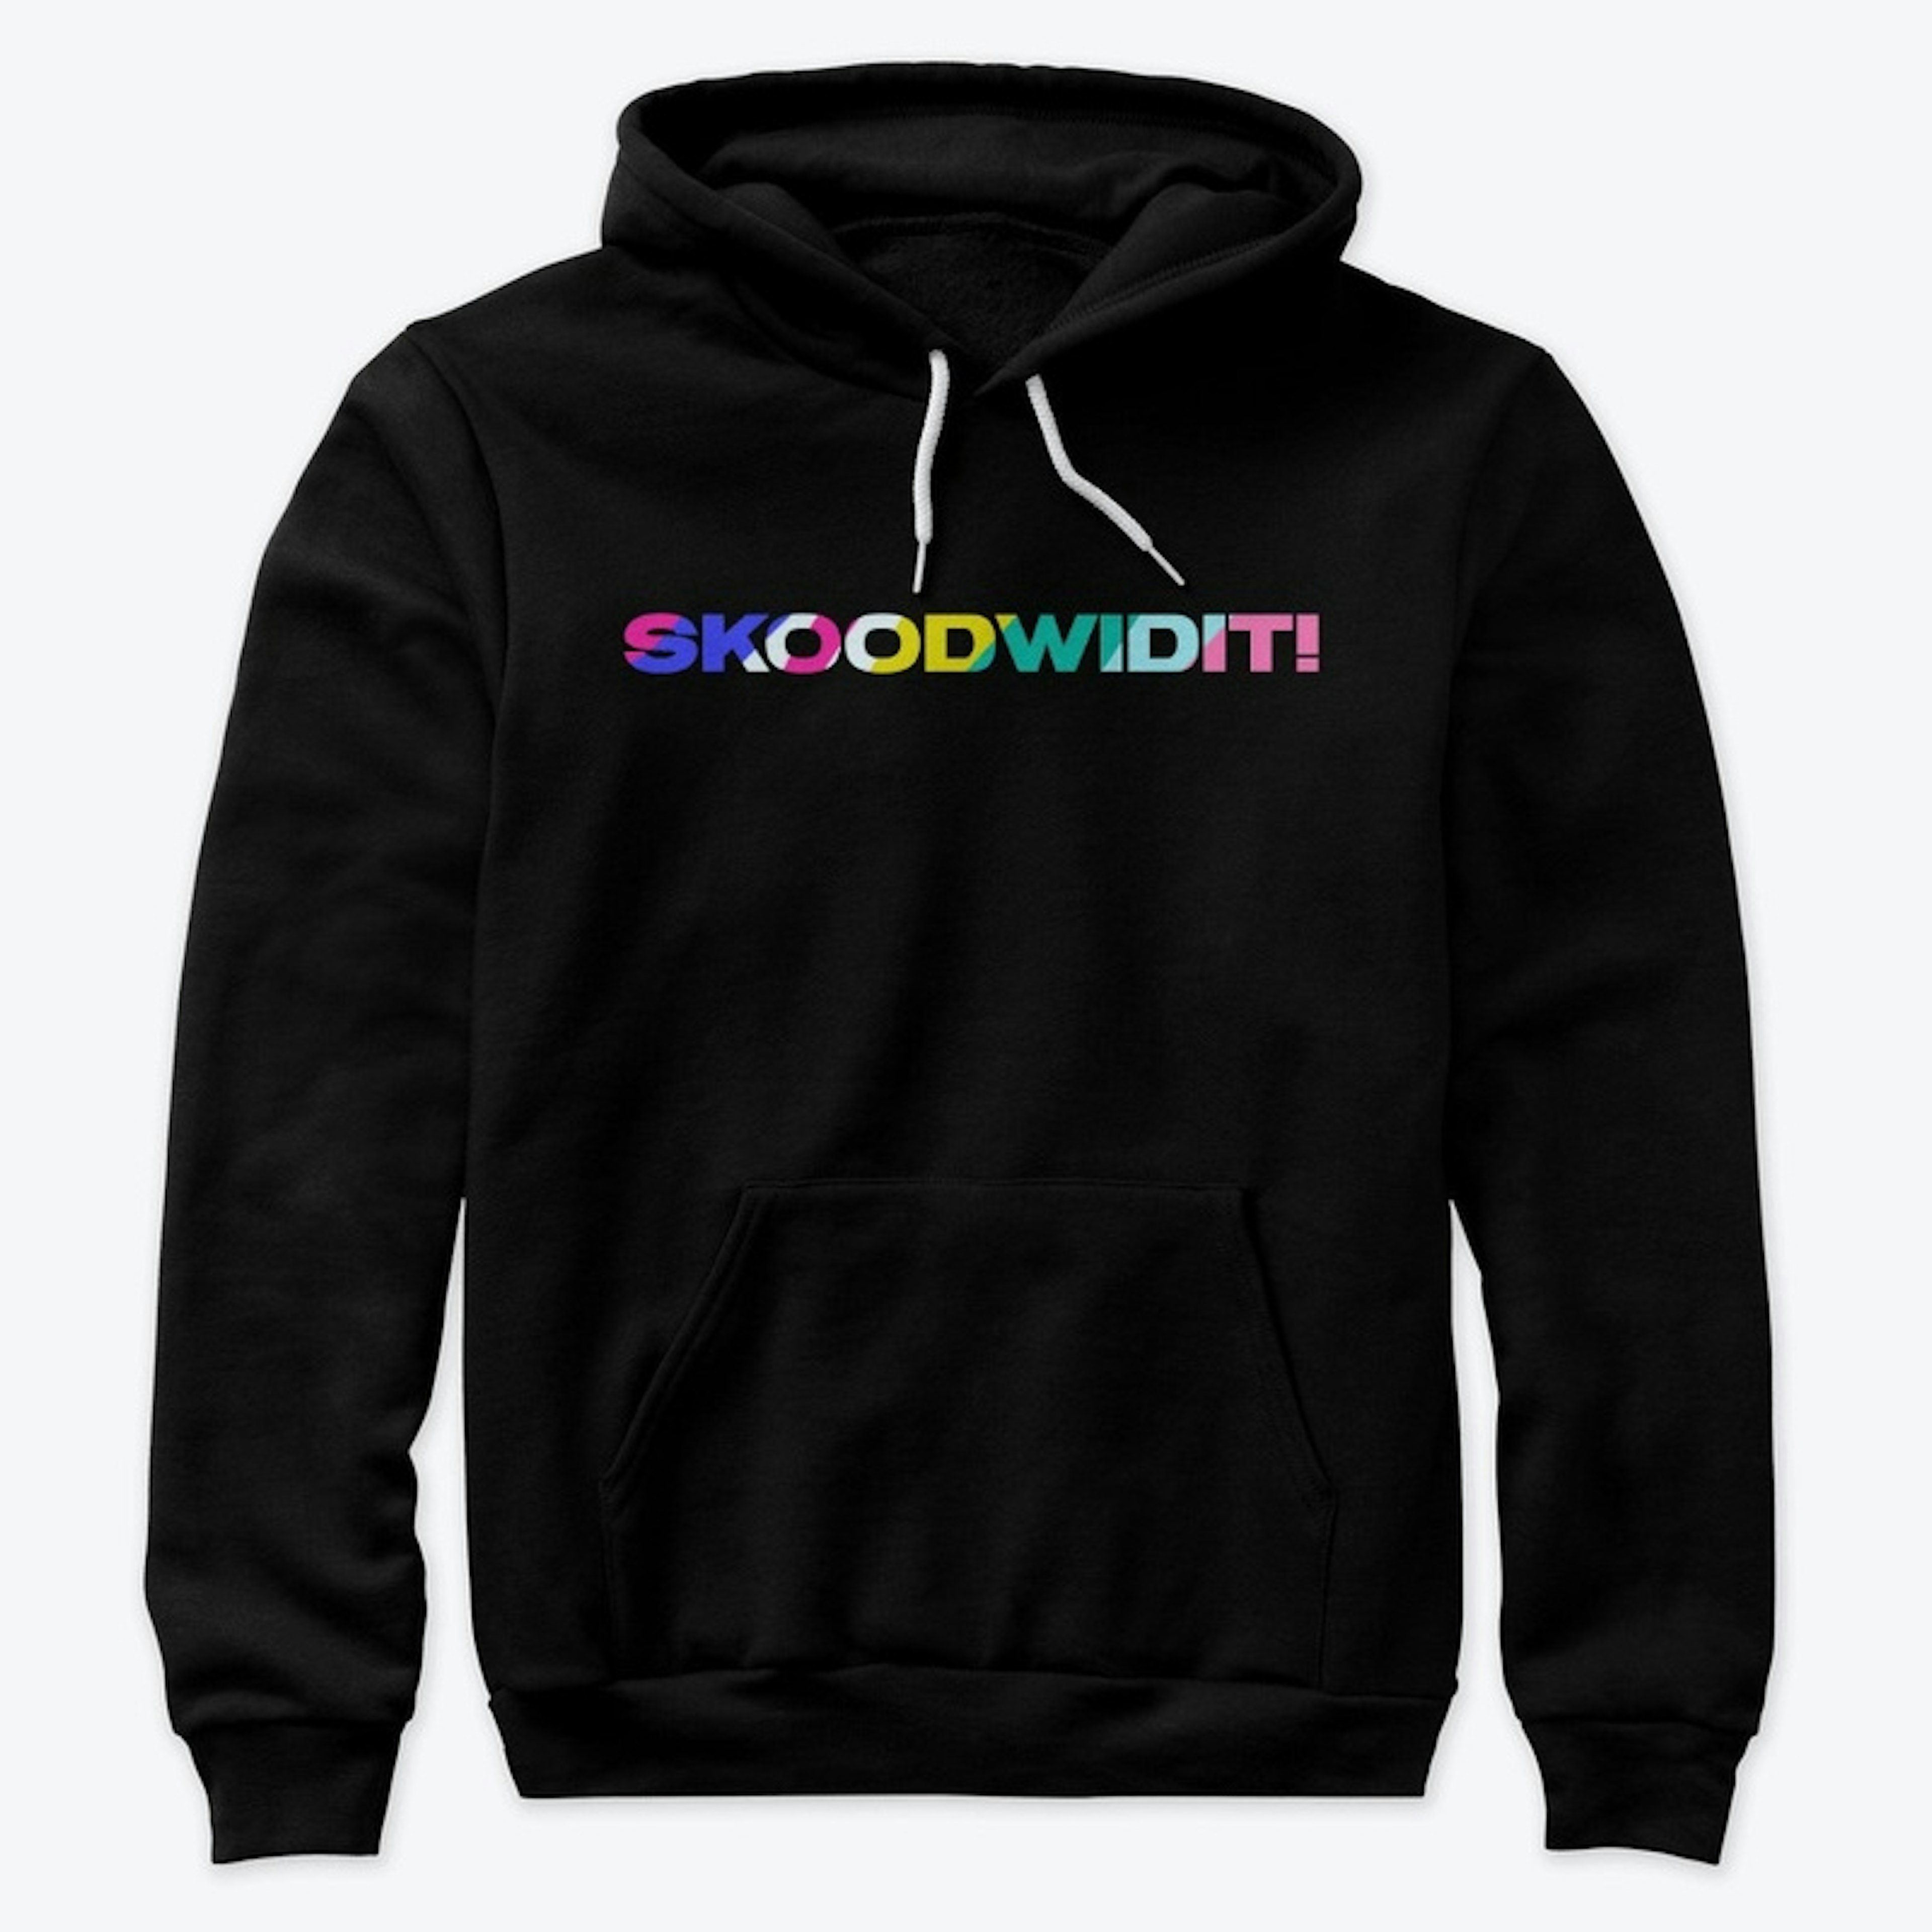 SKOODWIDIT! FOR ALL